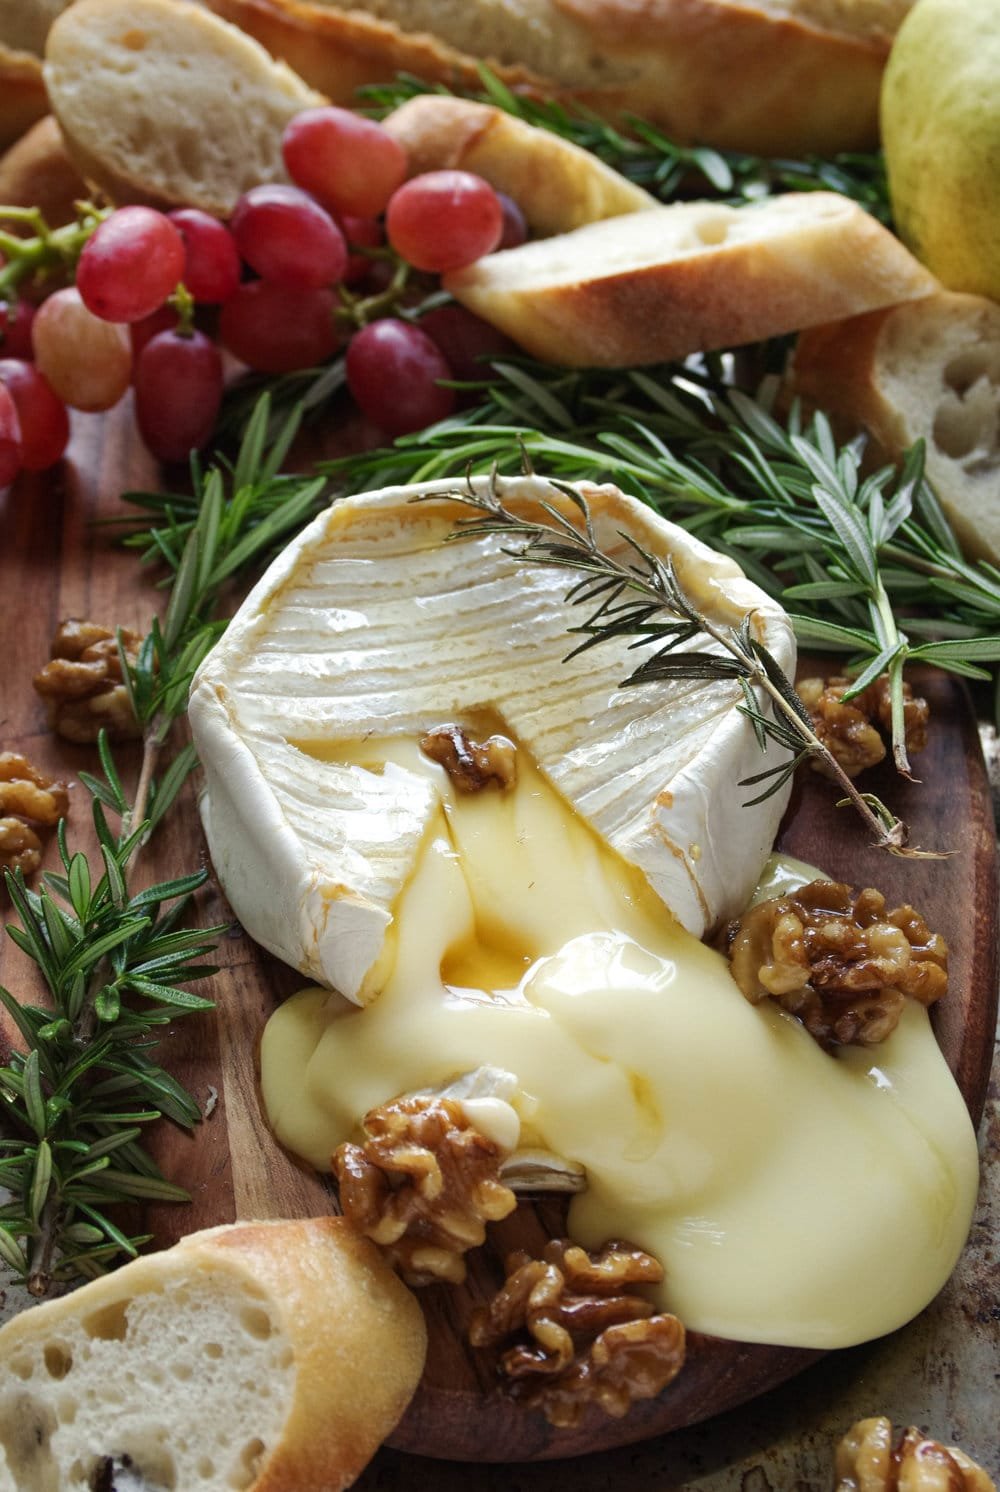 Gooey baked brie with maple candied walnuts on a small wood serving board with grapes and sliced bread.